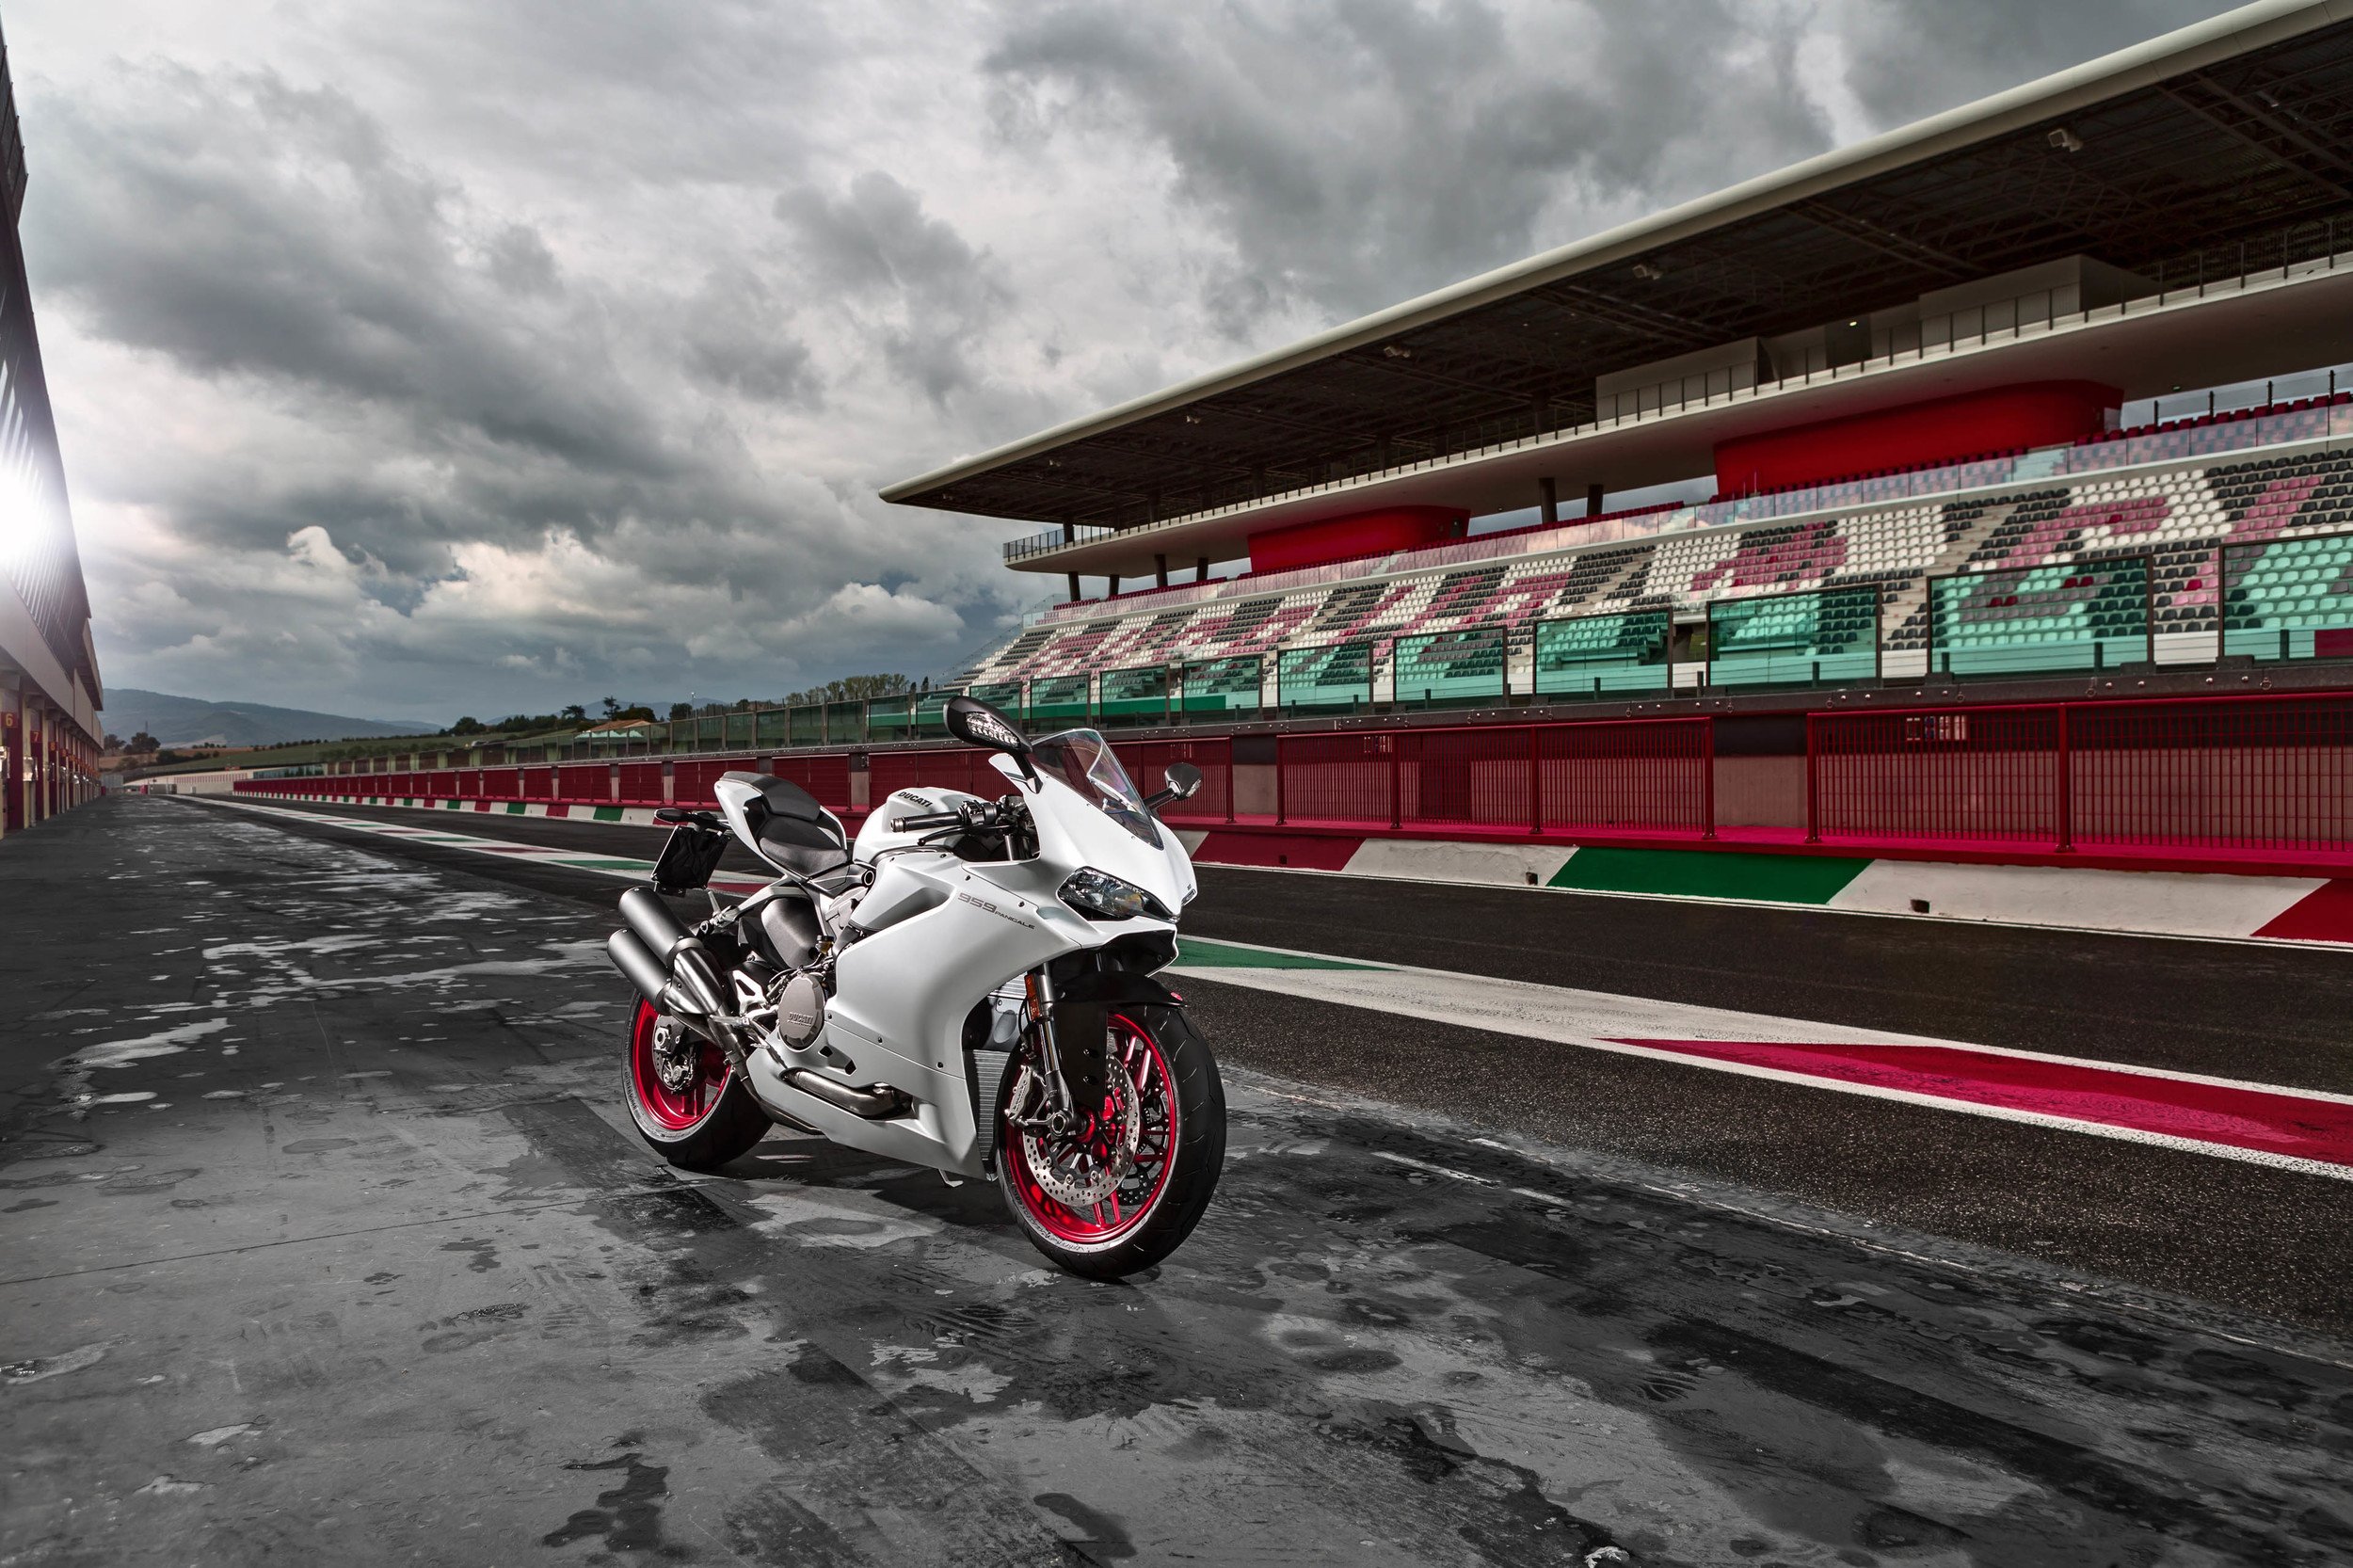 Ducati Panigale 959 2016 motocycles wallpaper background